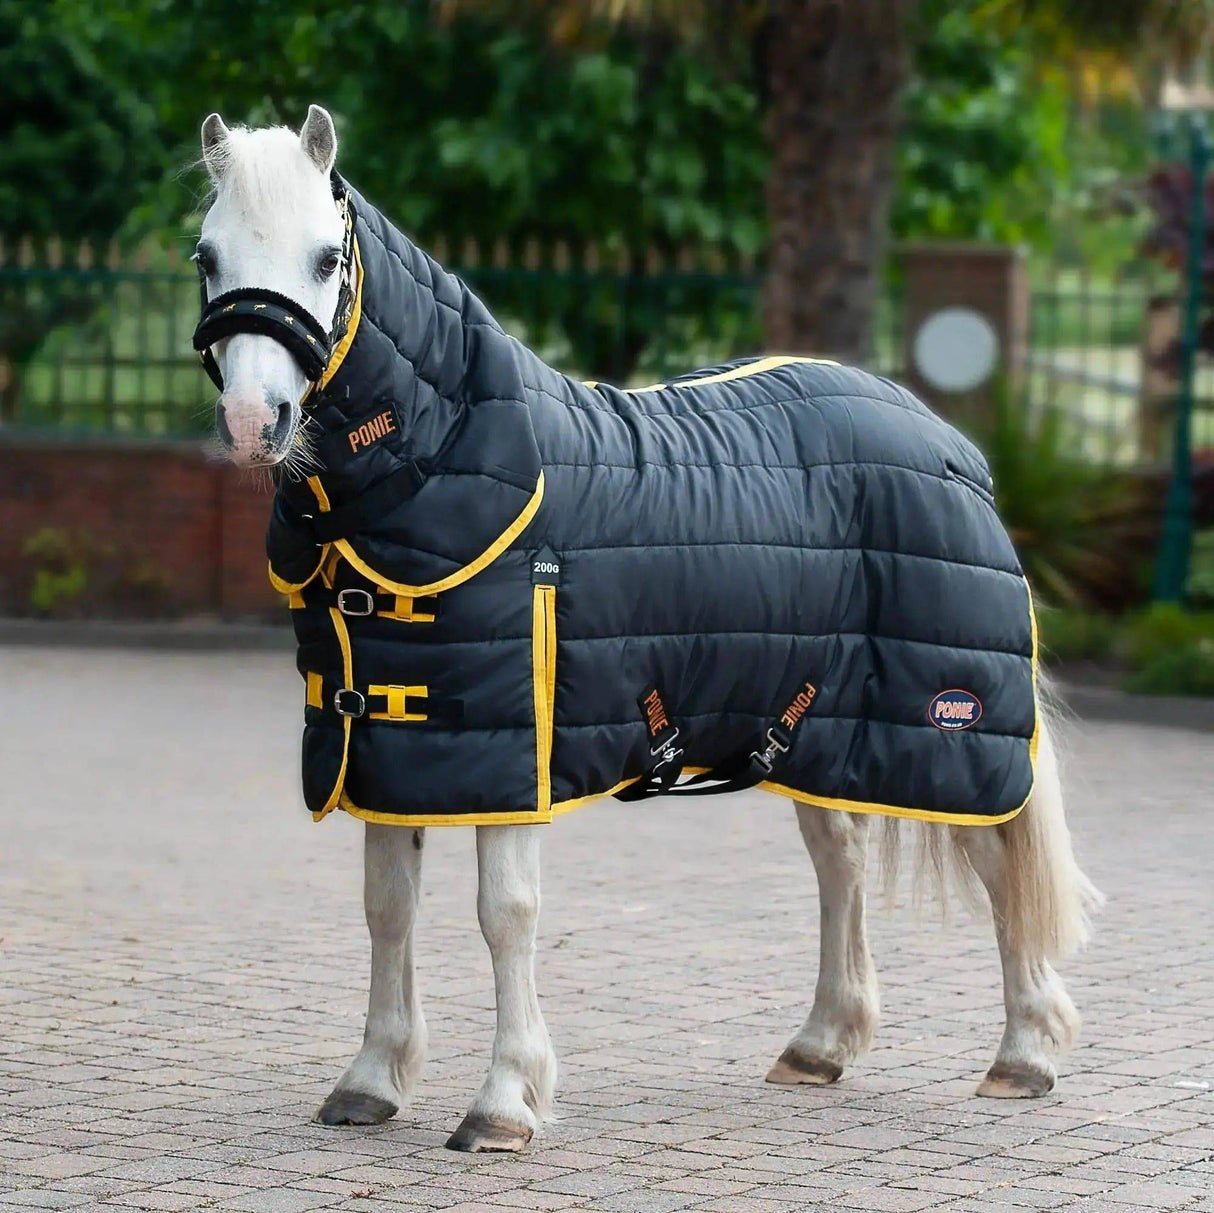 Gallop Ponie 200g Stable Rug Medium Weight Combo 5'3 Gallop Equestrian Stable Rugs Barnstaple Equestrian Supplies